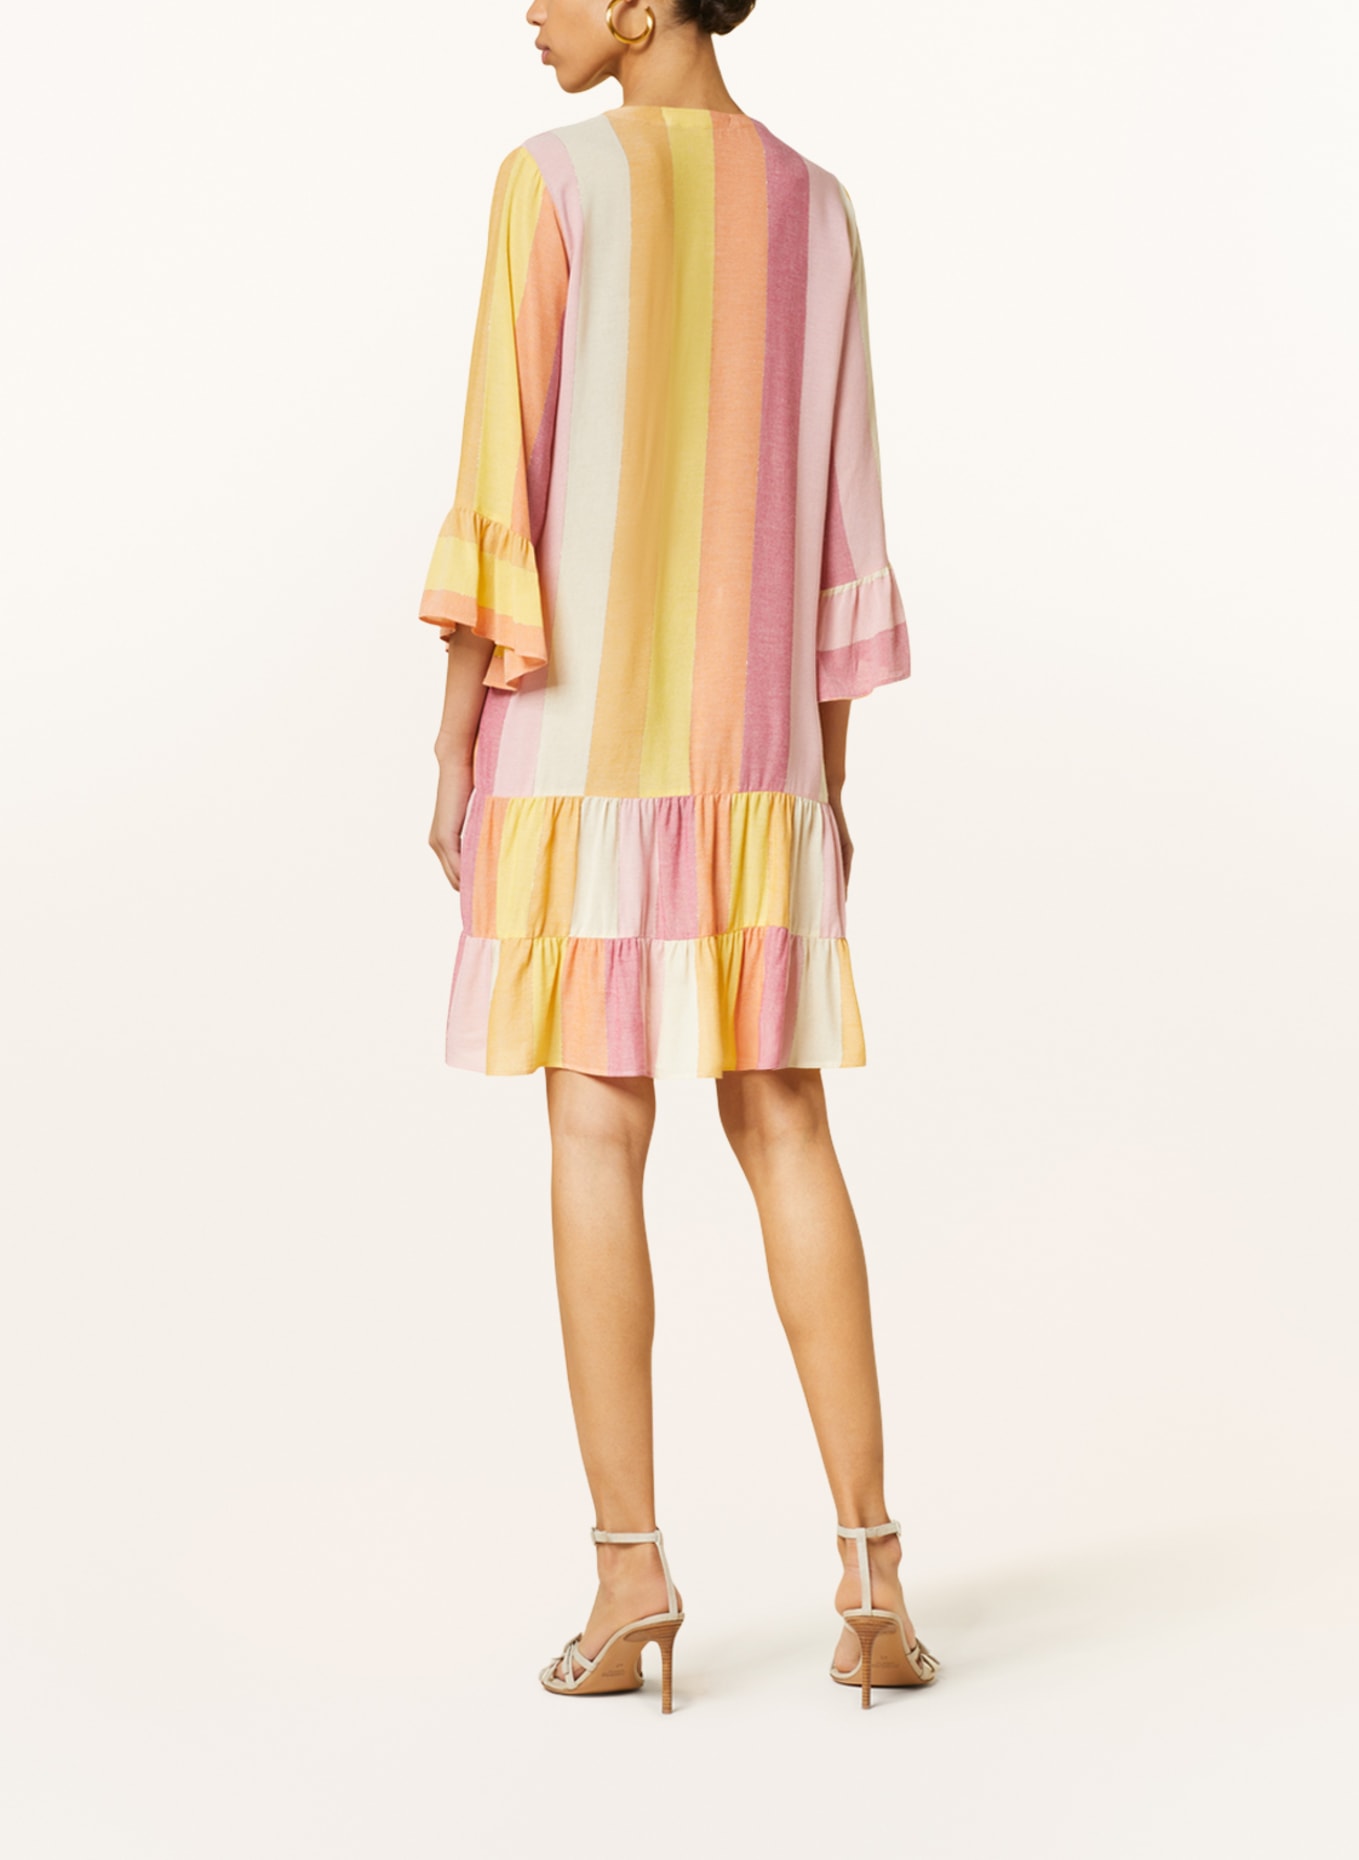 VALÉRIE KHALFON Dress MONTANA with 3/4 sleeve and glitter thread, Color: PINK/ LIGHT ORANGE/ YELLOW (Image 3)